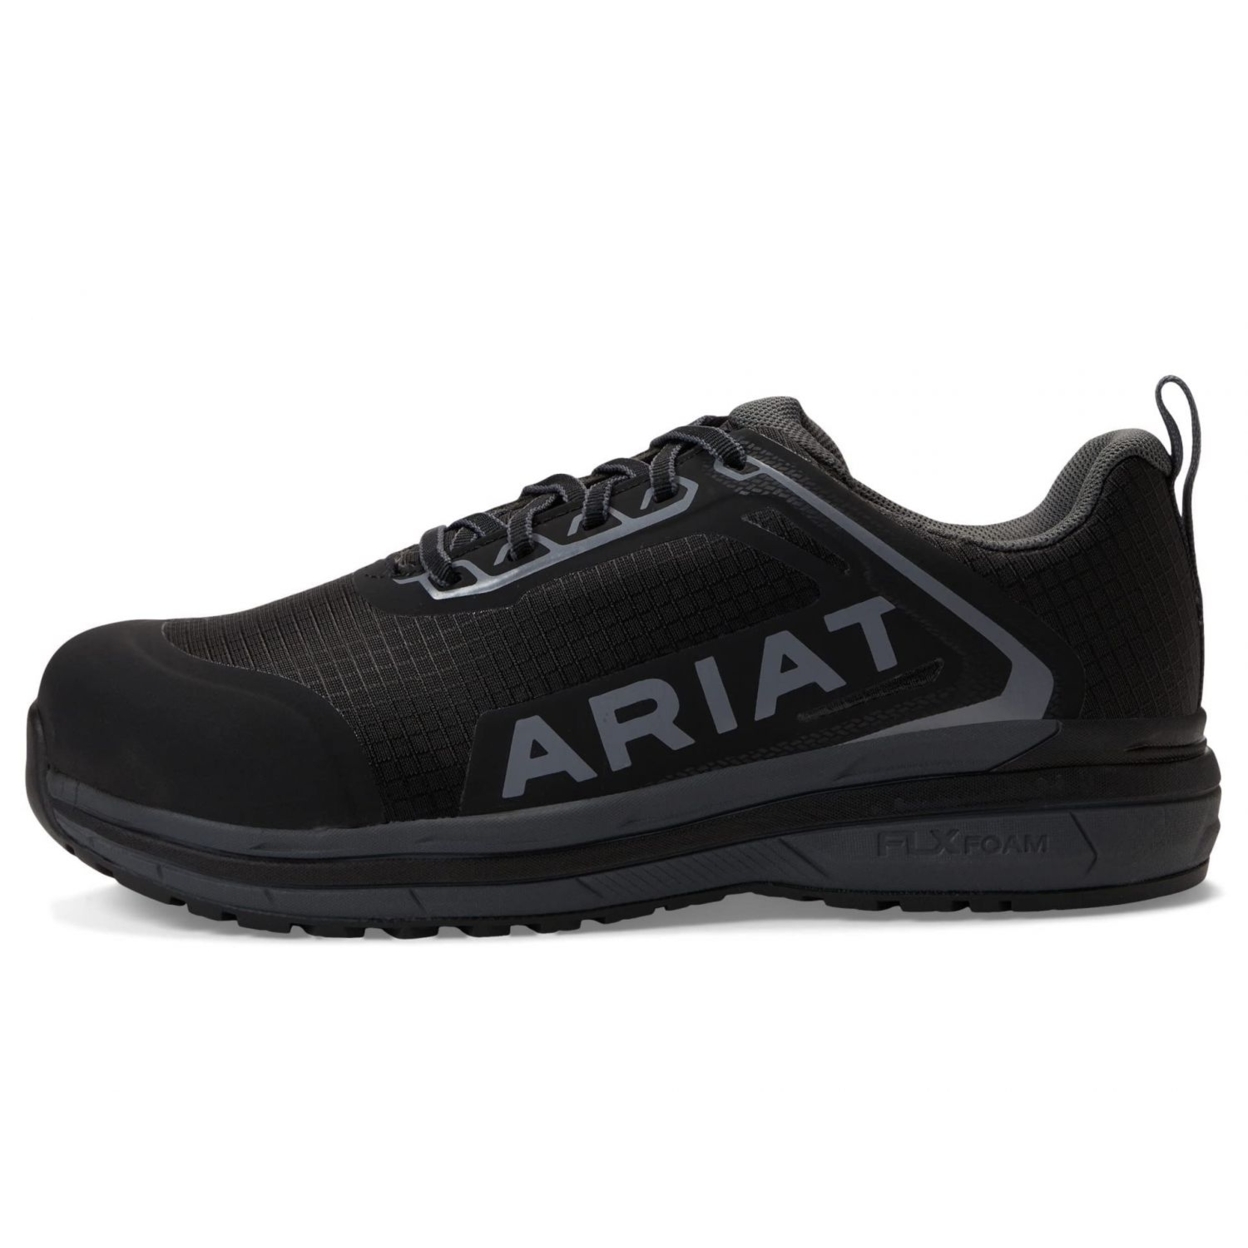 ARIAT Women's Outpace Composite Toe Safety Shoe Fire ONE SIZE BLACK - BLACK, 7 Wide